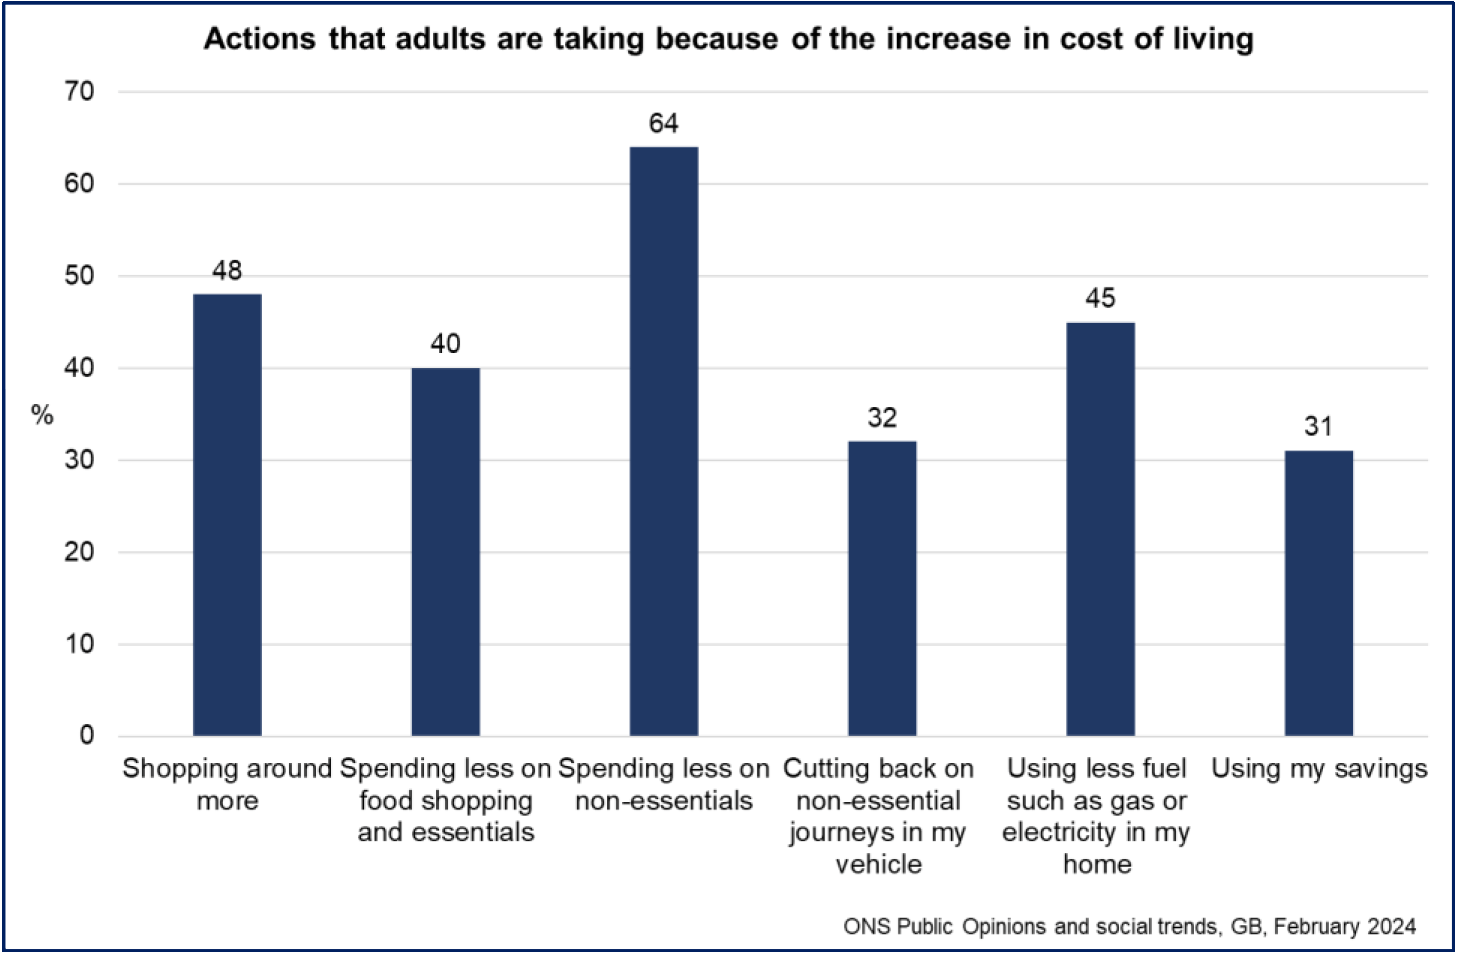 adults are taking a range of actions in response to the increased cost of living with the highest proportions reporting spending less on non-essentials and shopping around more